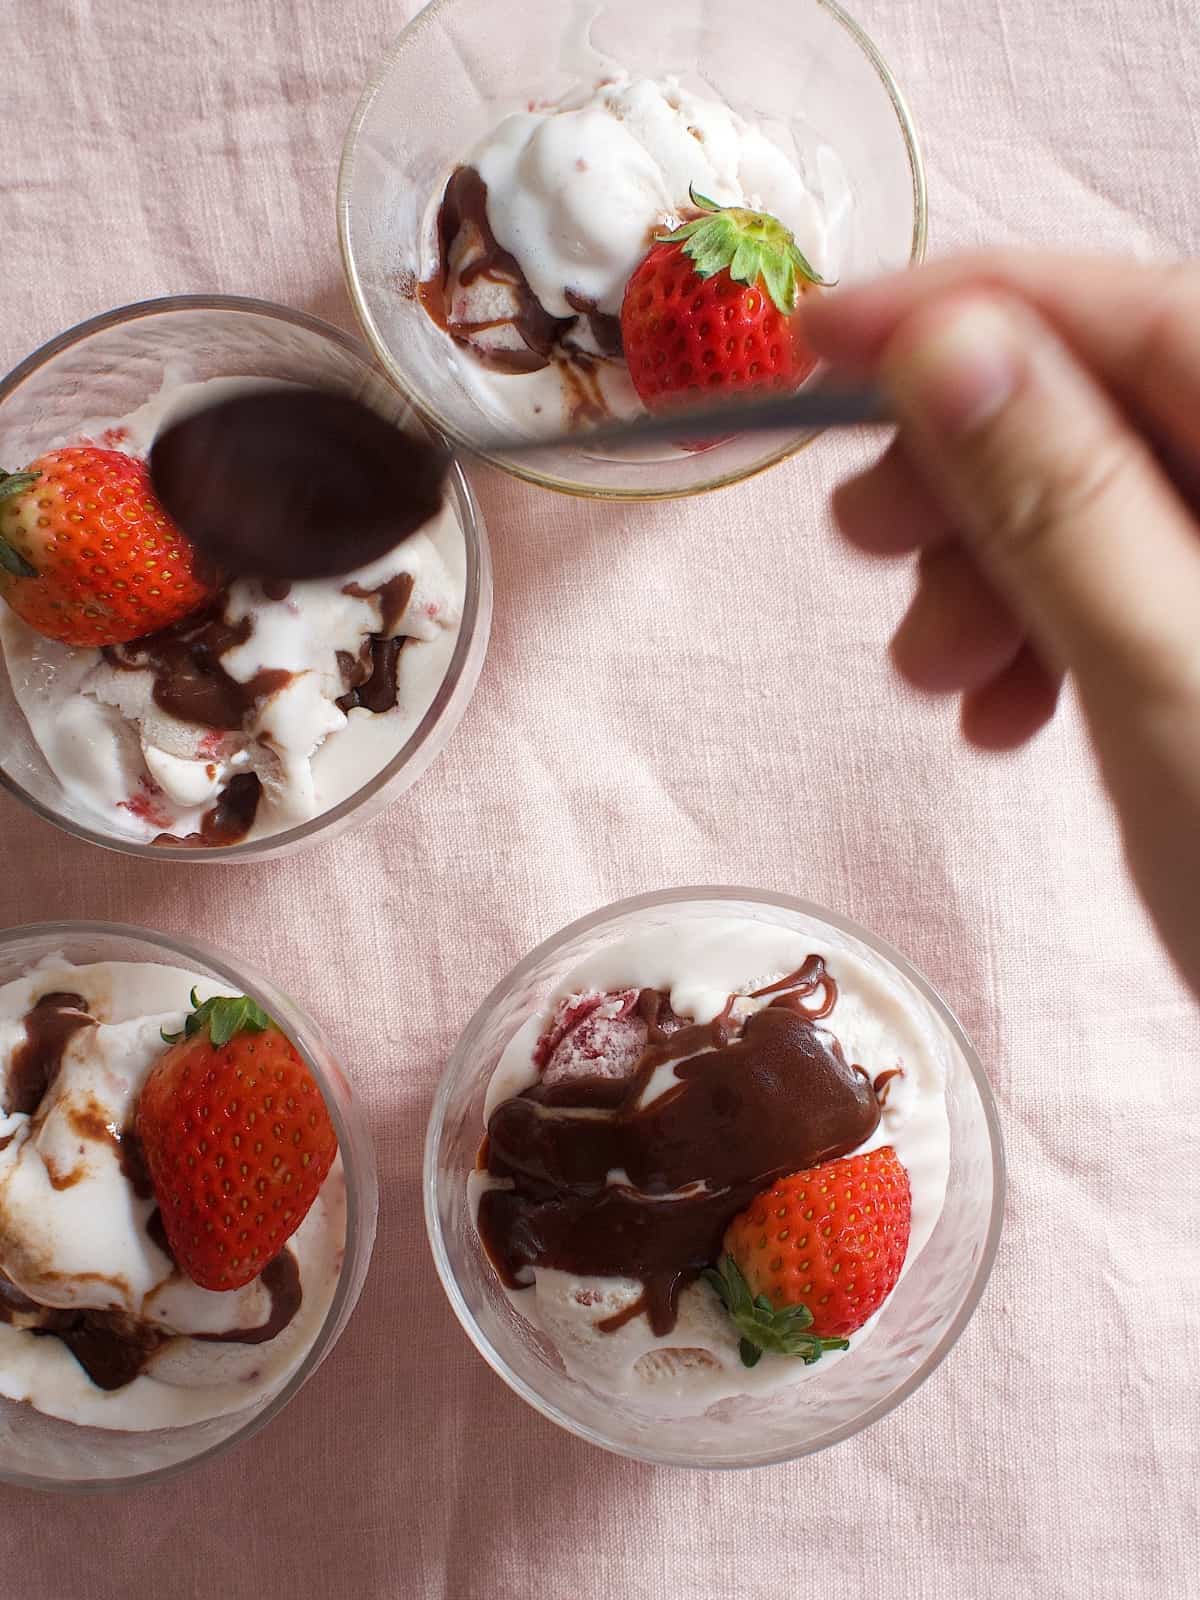 A spoon pouring fudge over four sundaes topped with strawberries.